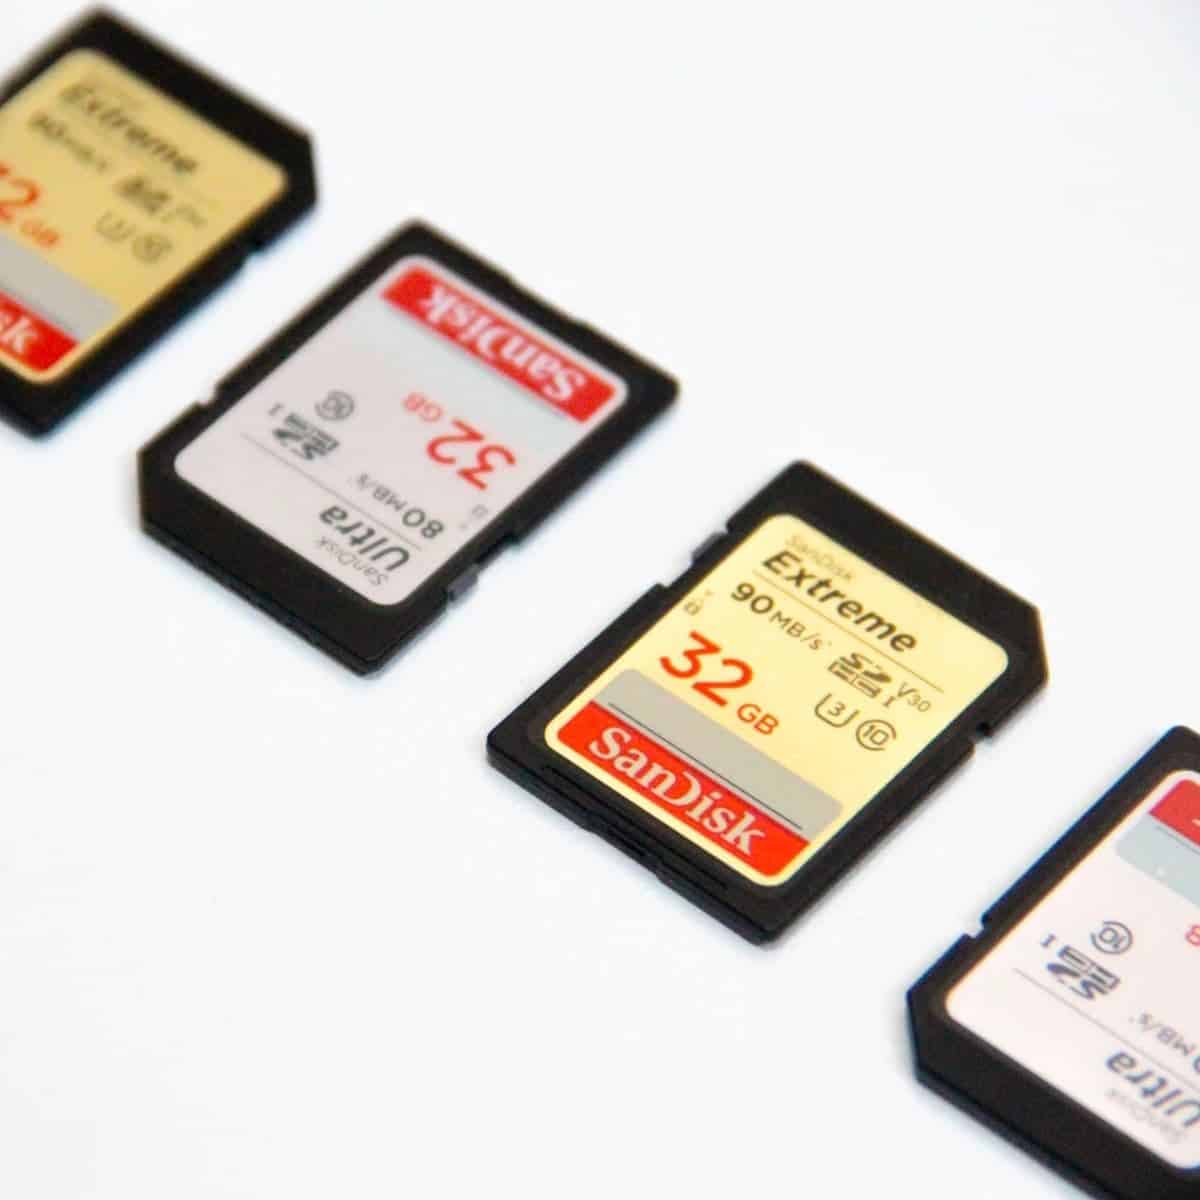 Four memory cards on a table.